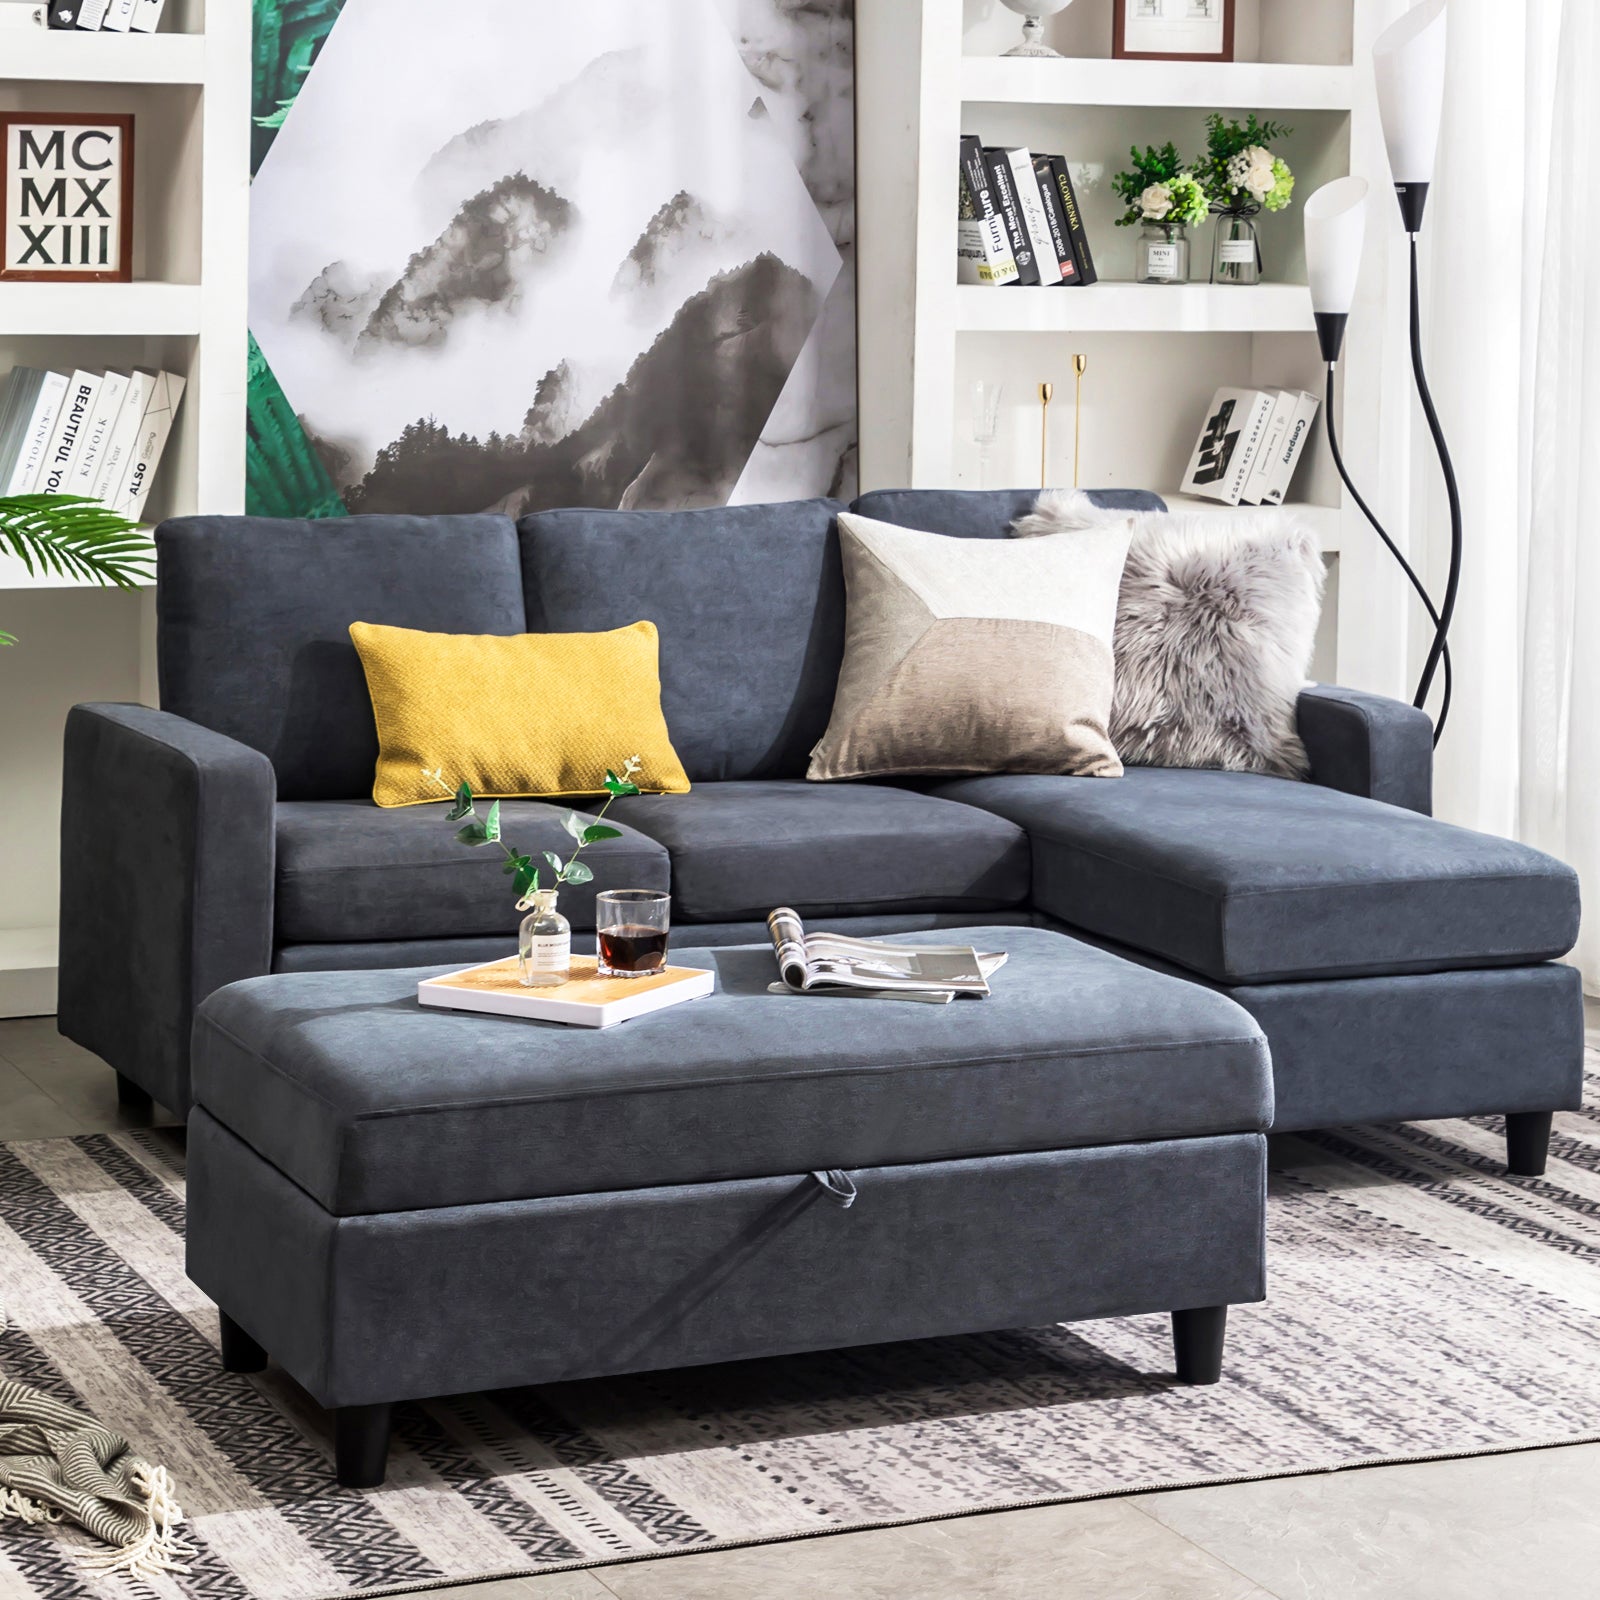 Honbay 3-Seat Sectional Sofa Couch with Ottoman in Living Room